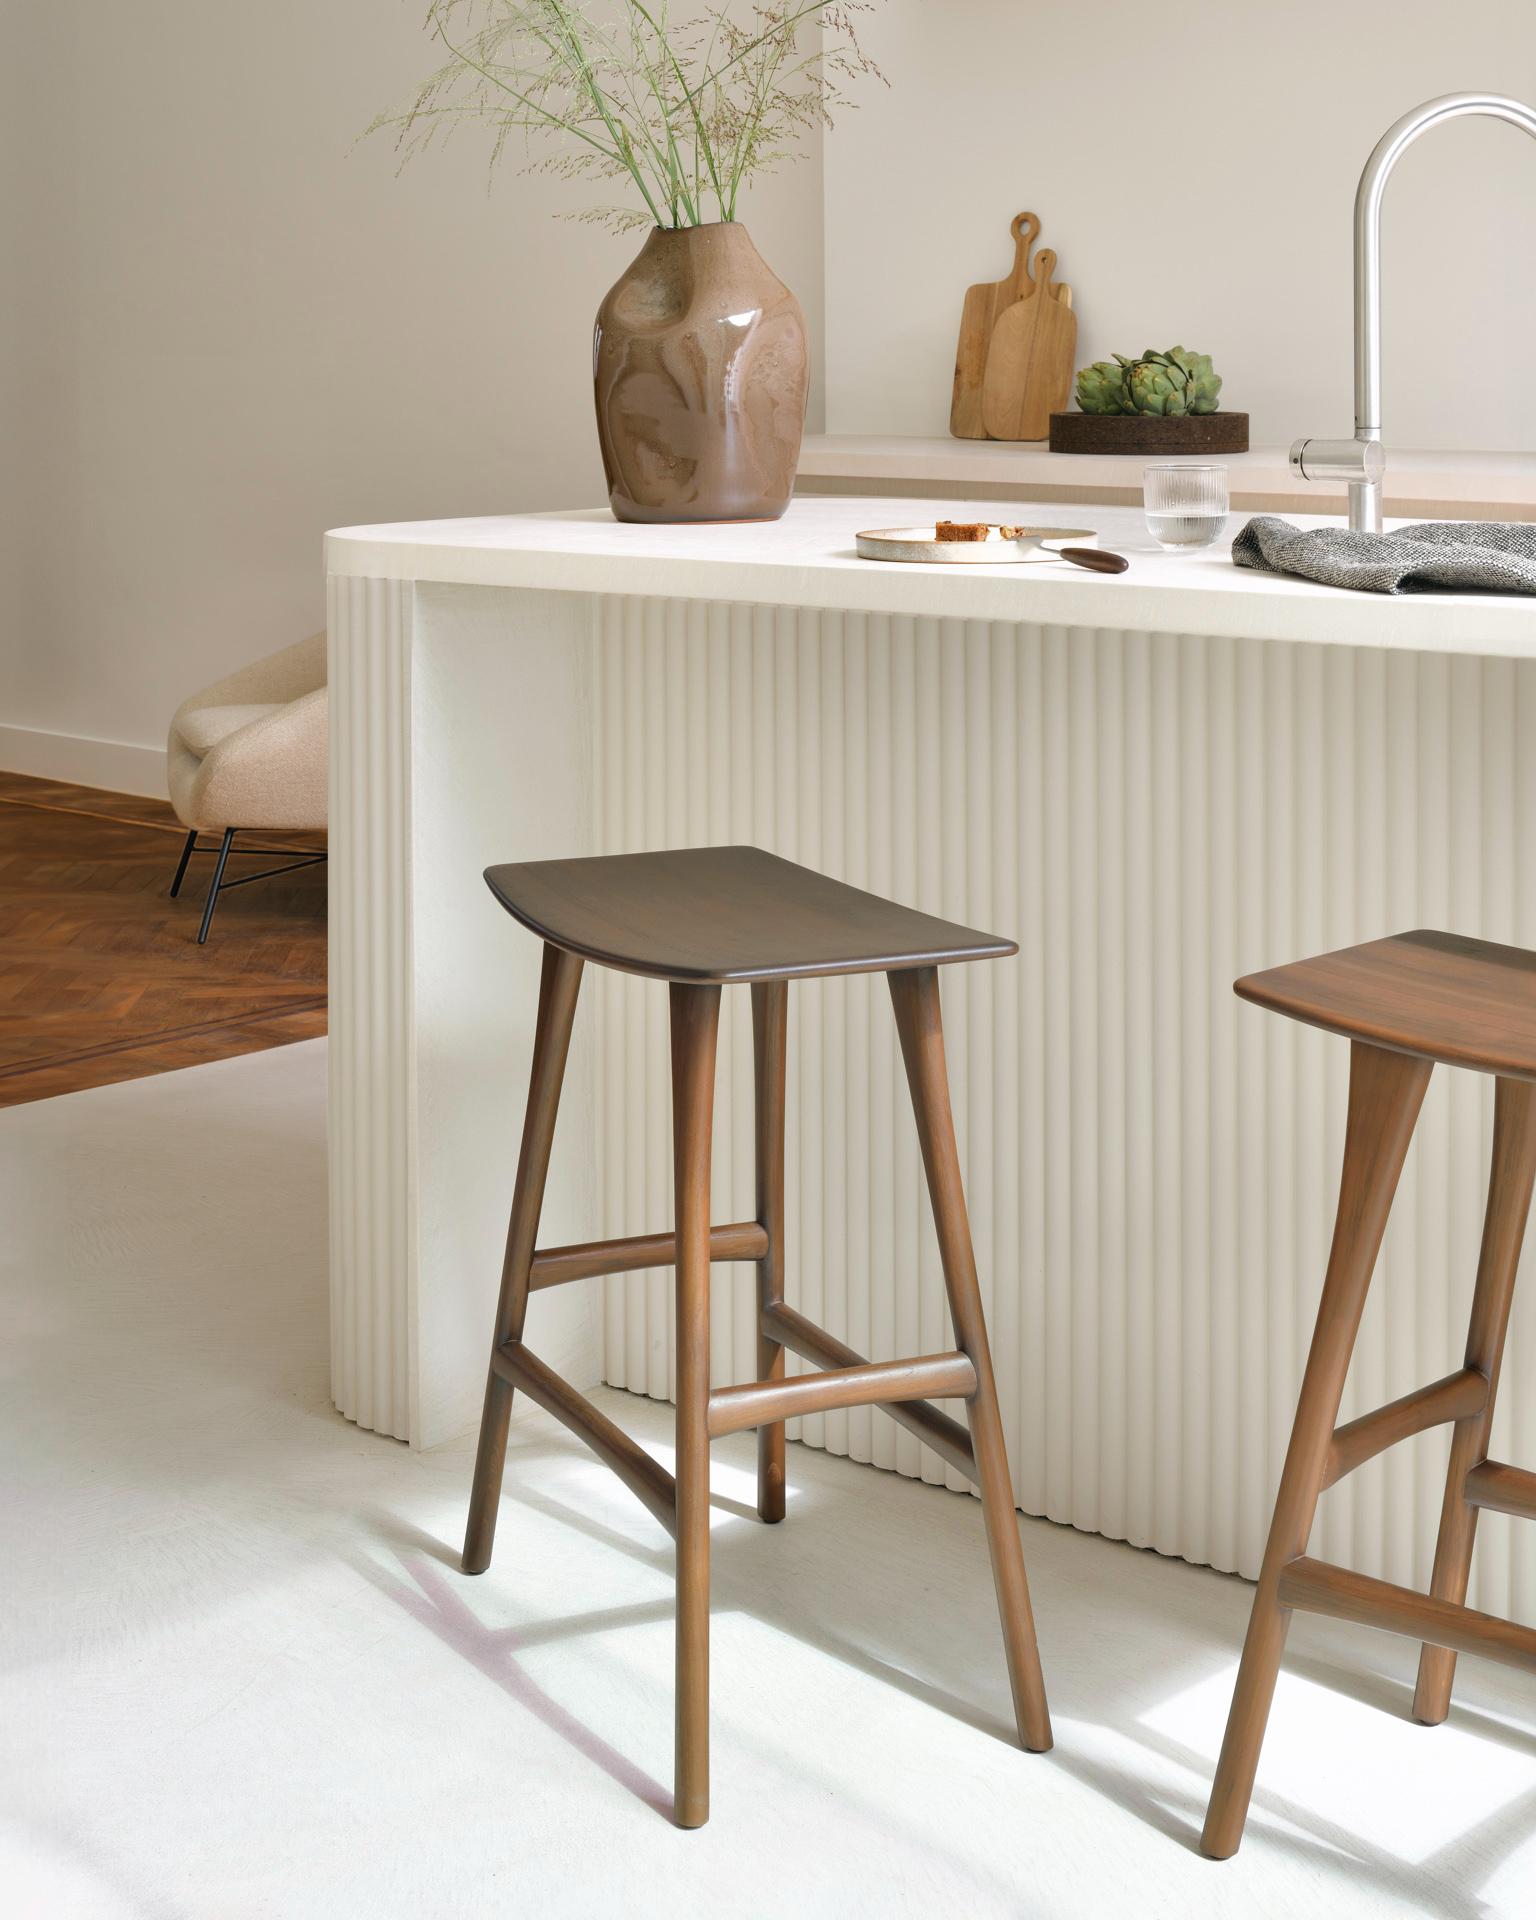 Rent the Osso stool at Live Light for your space